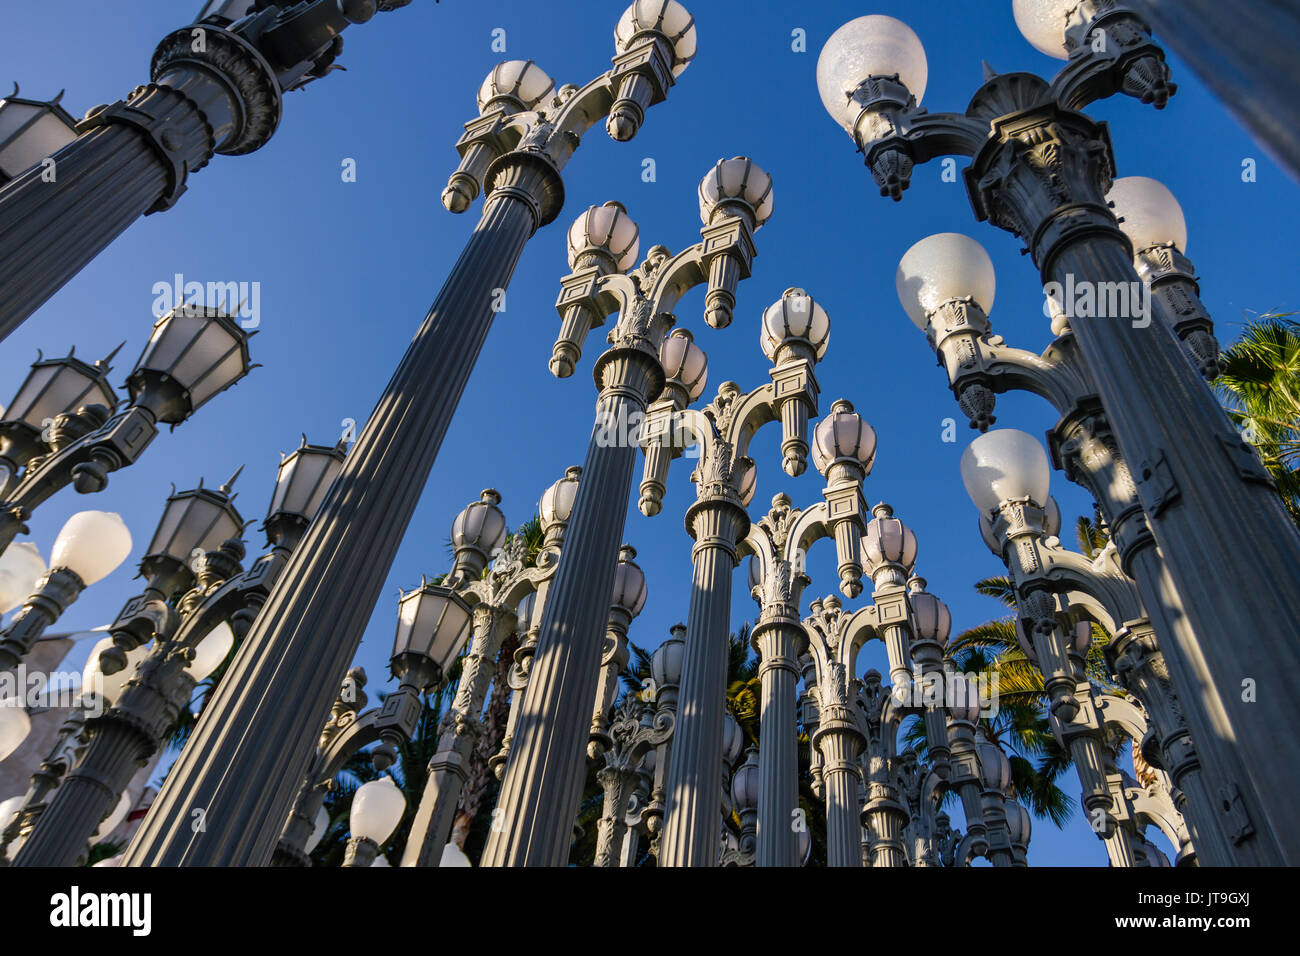 Urban Light is a large-scale assemblage sculpture by Chris Burden located at the Wilshire Boulevard entrance to the Los Angeles County Museum of Art. Stock Photo